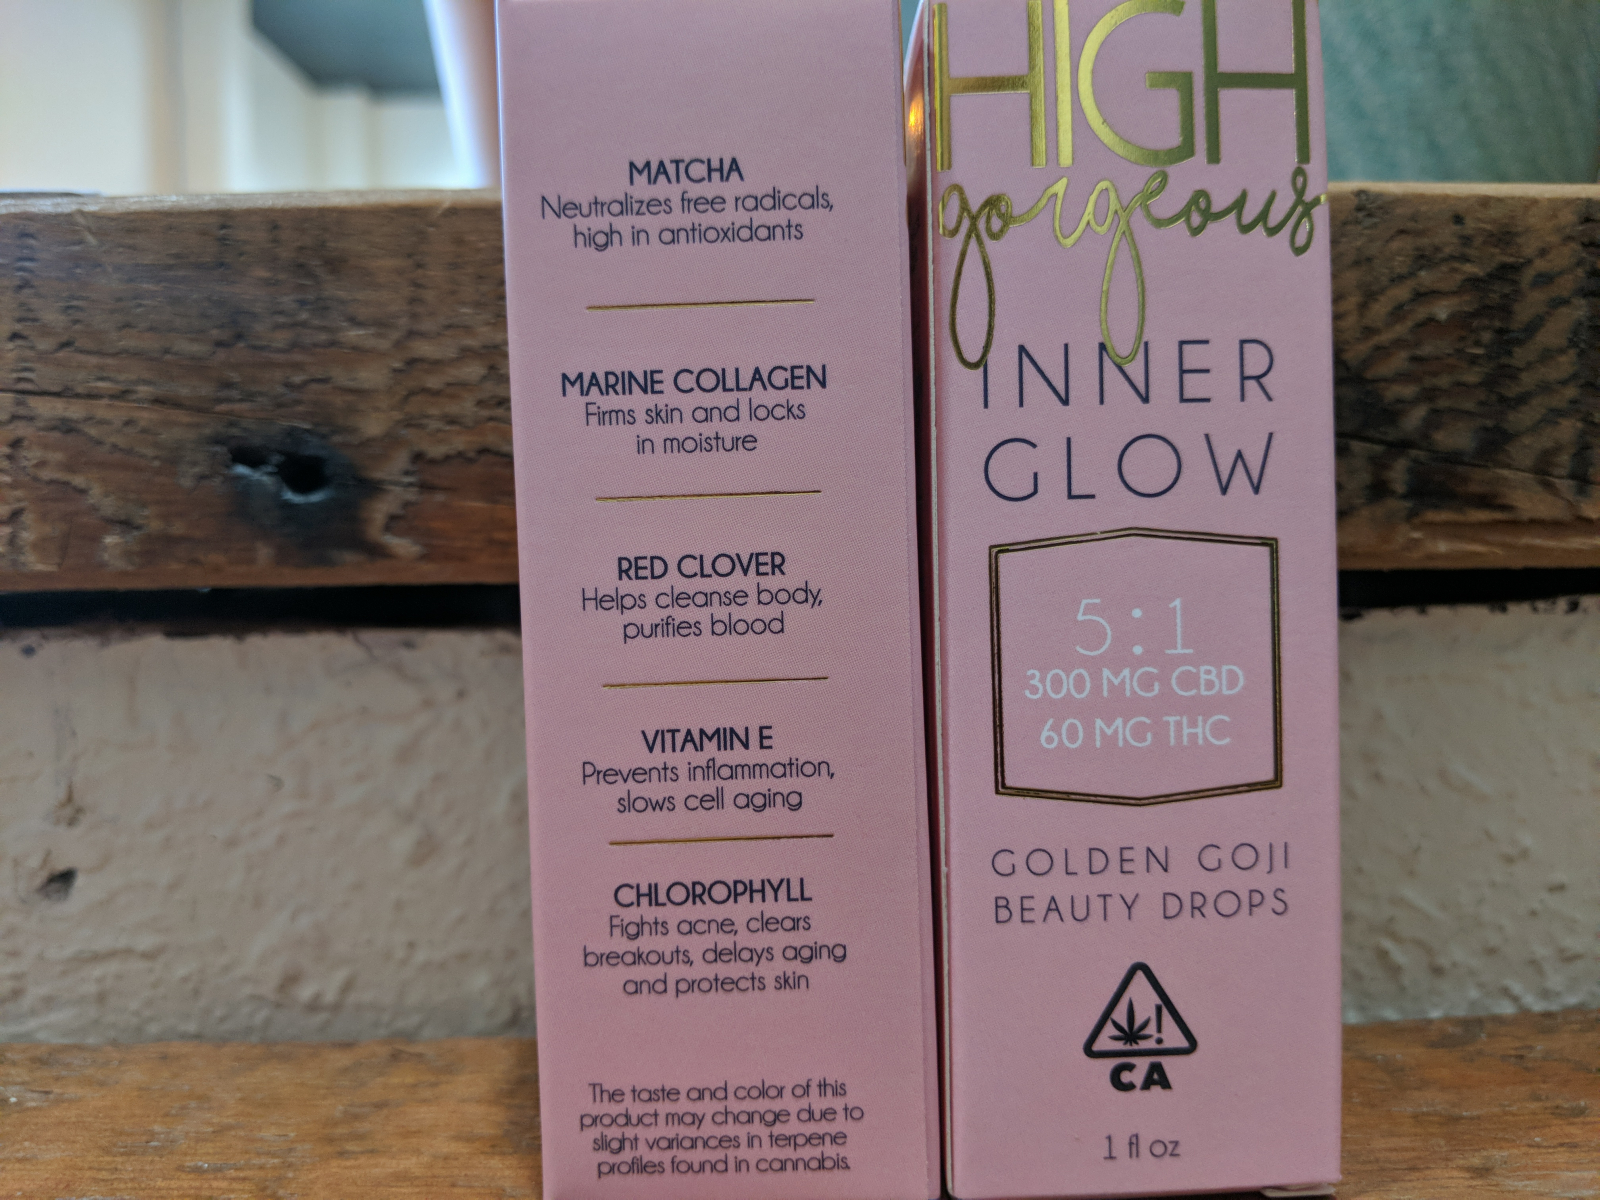 High Gorgeous Inner Glow tincture